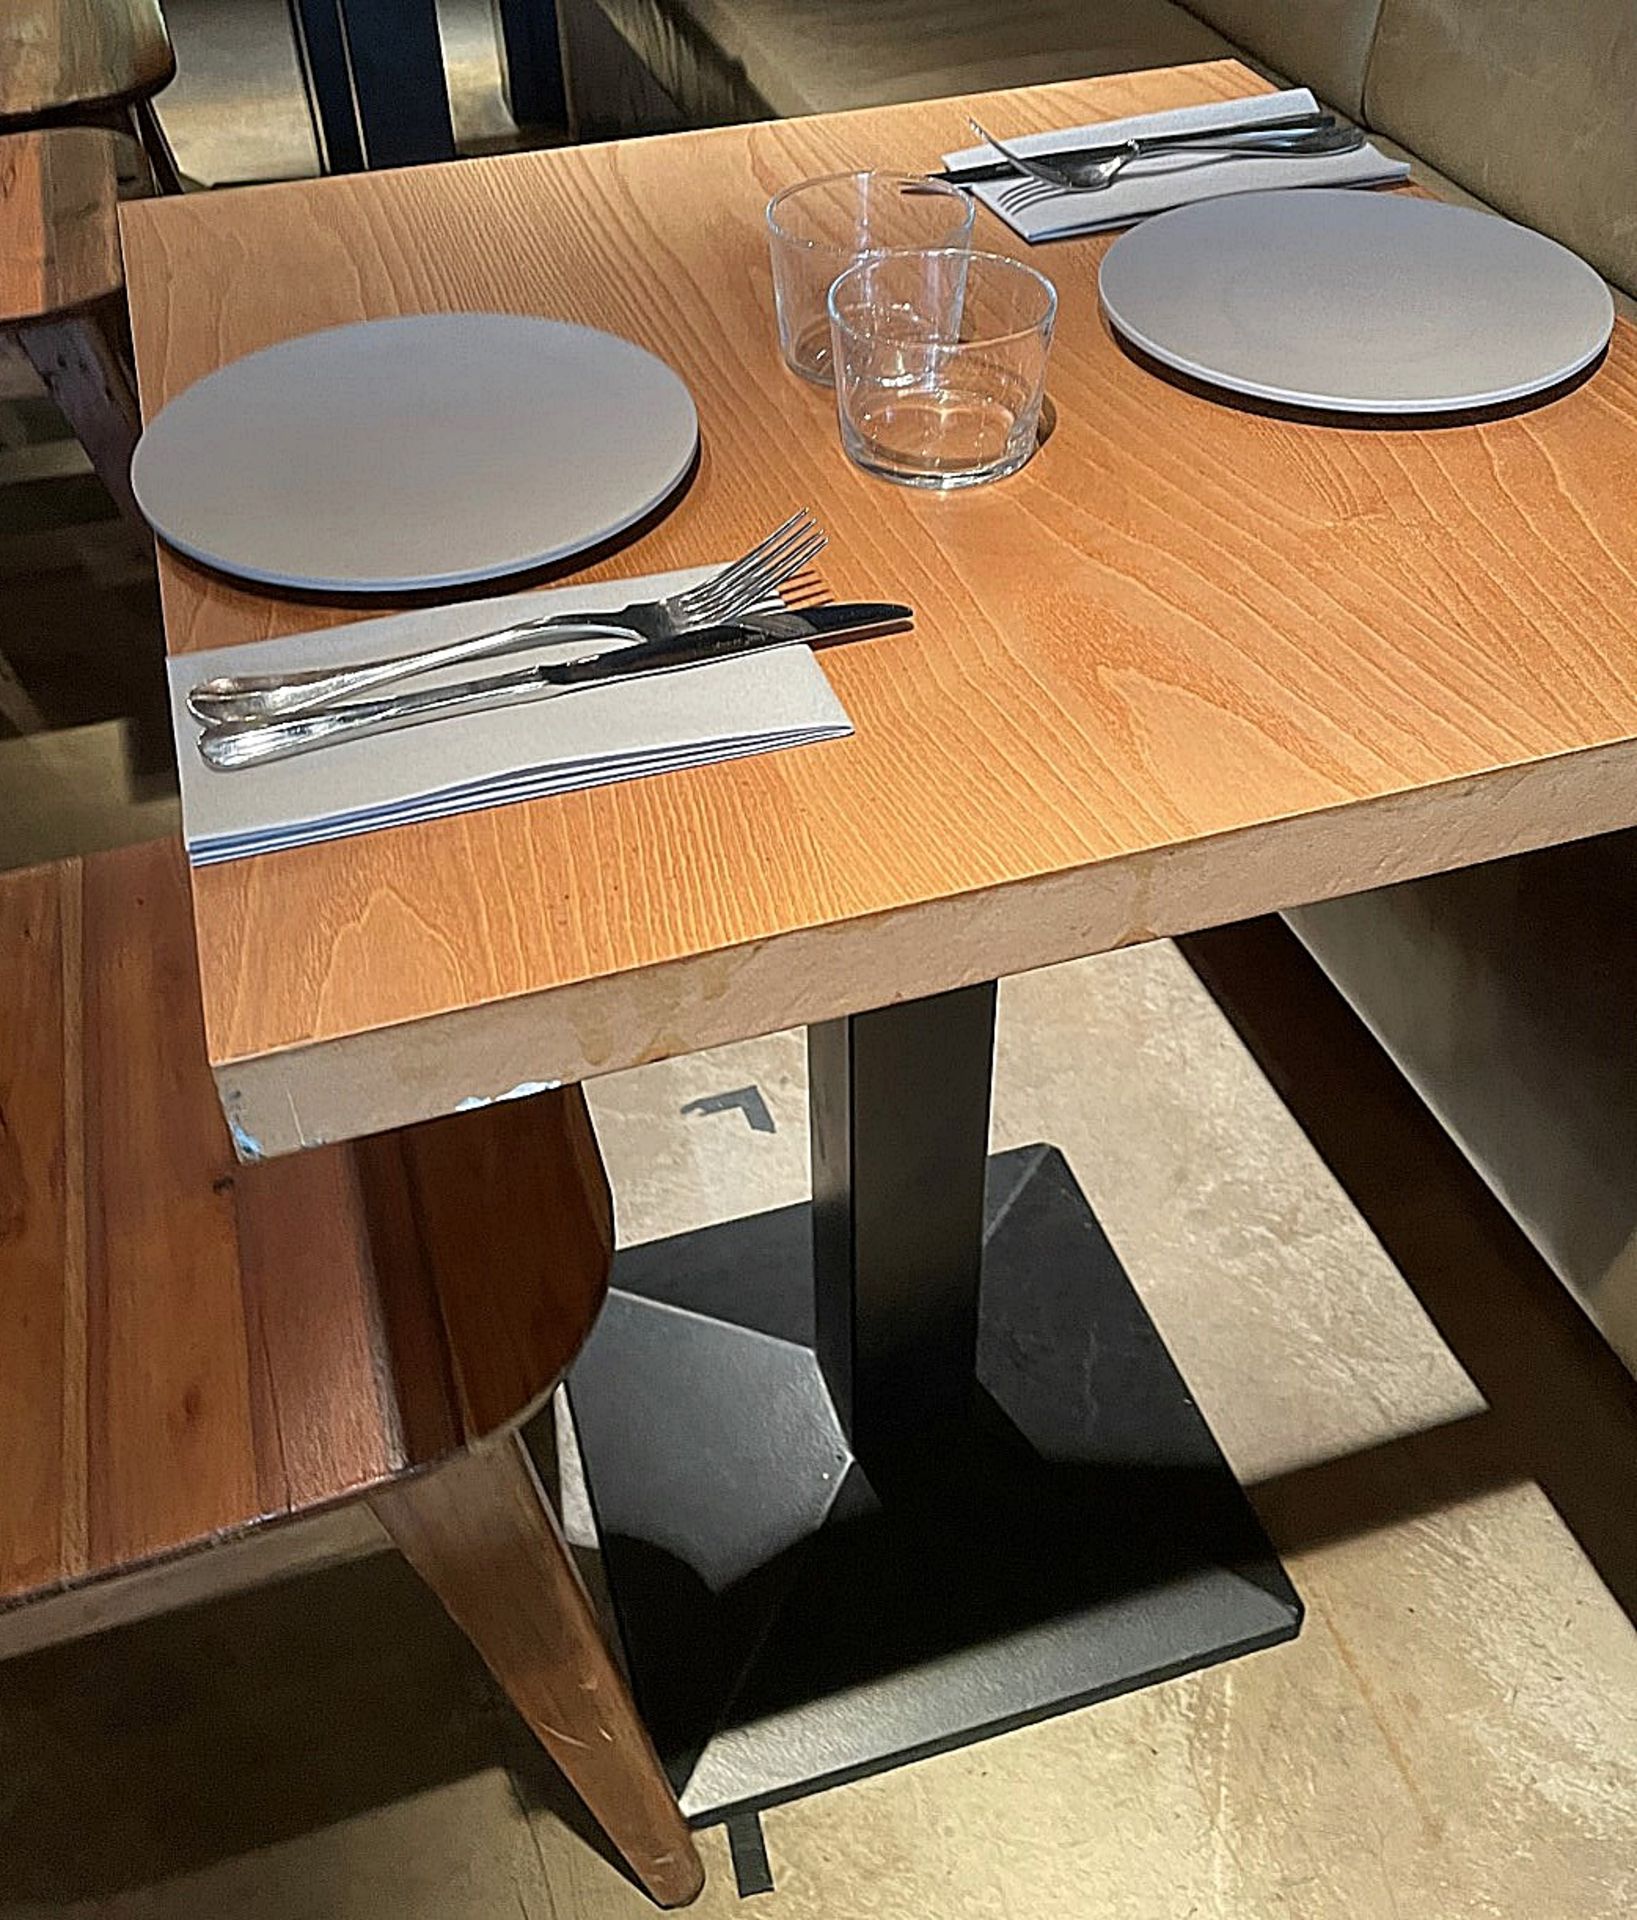 4 x Square Bistro Tables Featuring Wooden Tops And Sturdy Metal Bases - Dimensions To Follow - - Image 2 of 5